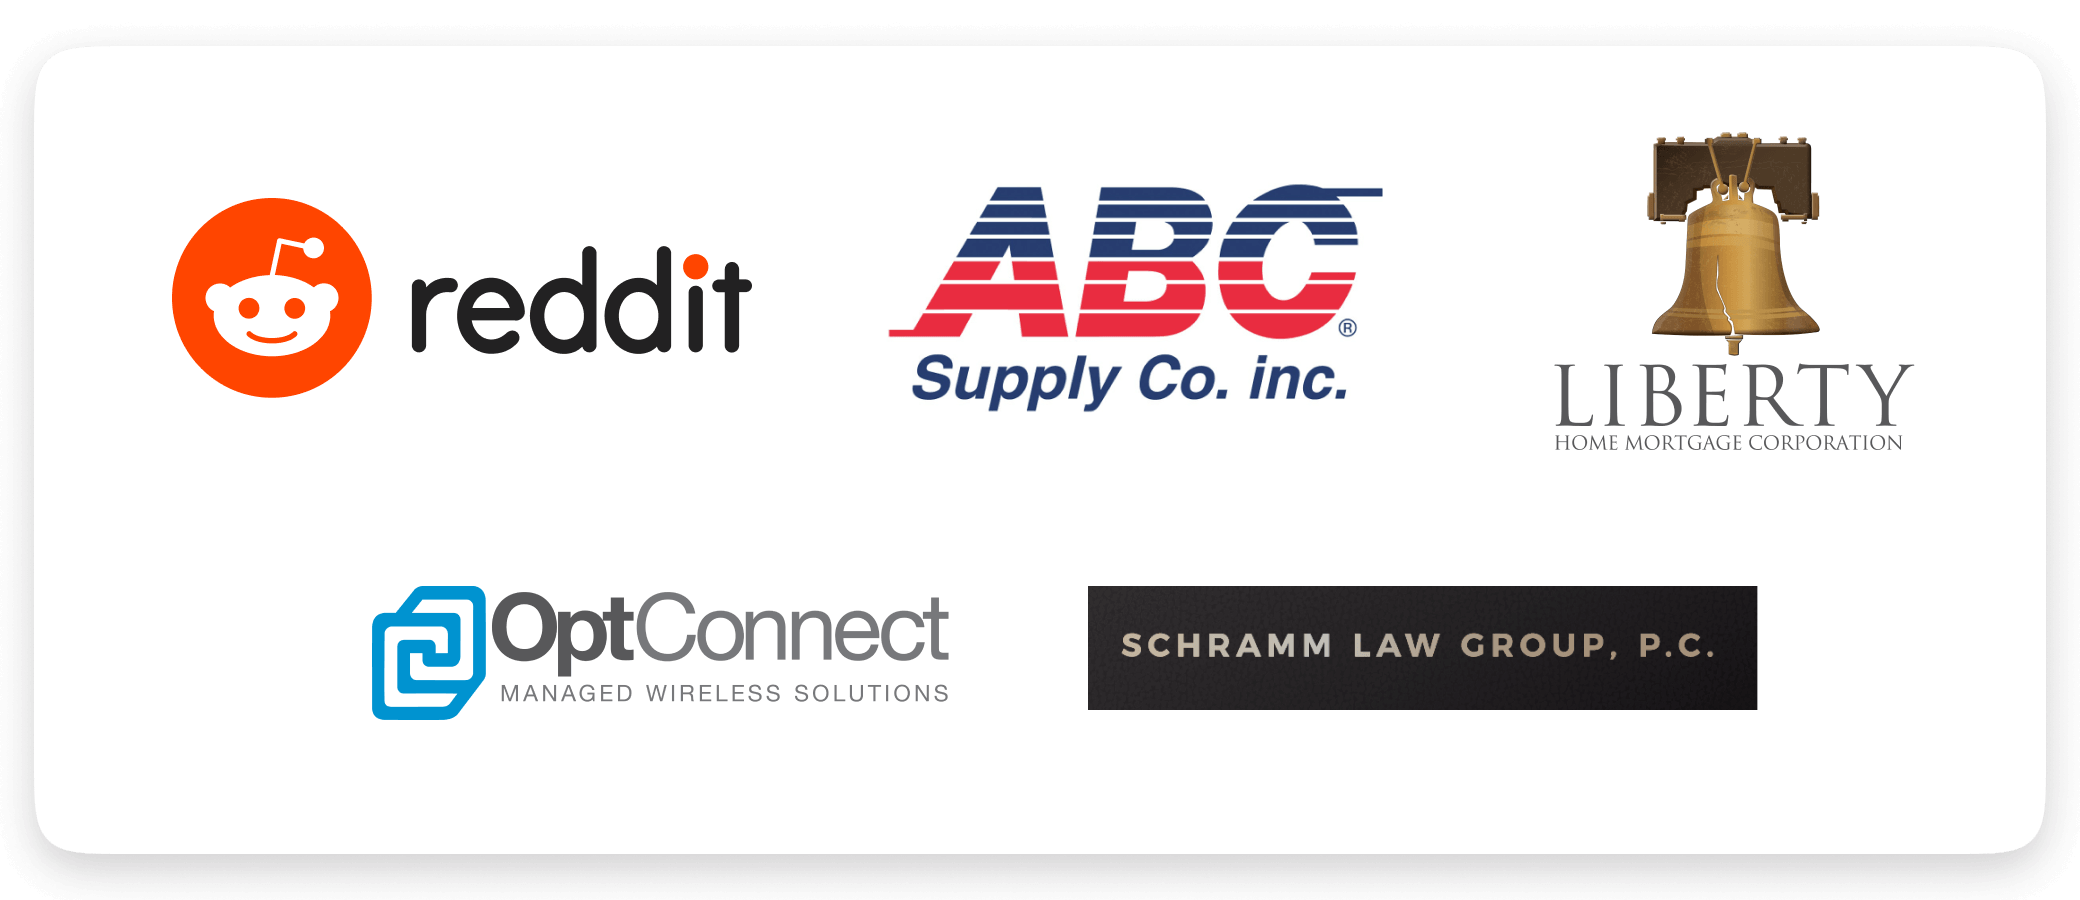 Logos: Reddit, ABC Supply, CO., OptConnect, Liberty Home Mortgage, Schramm Law Group, P.C.